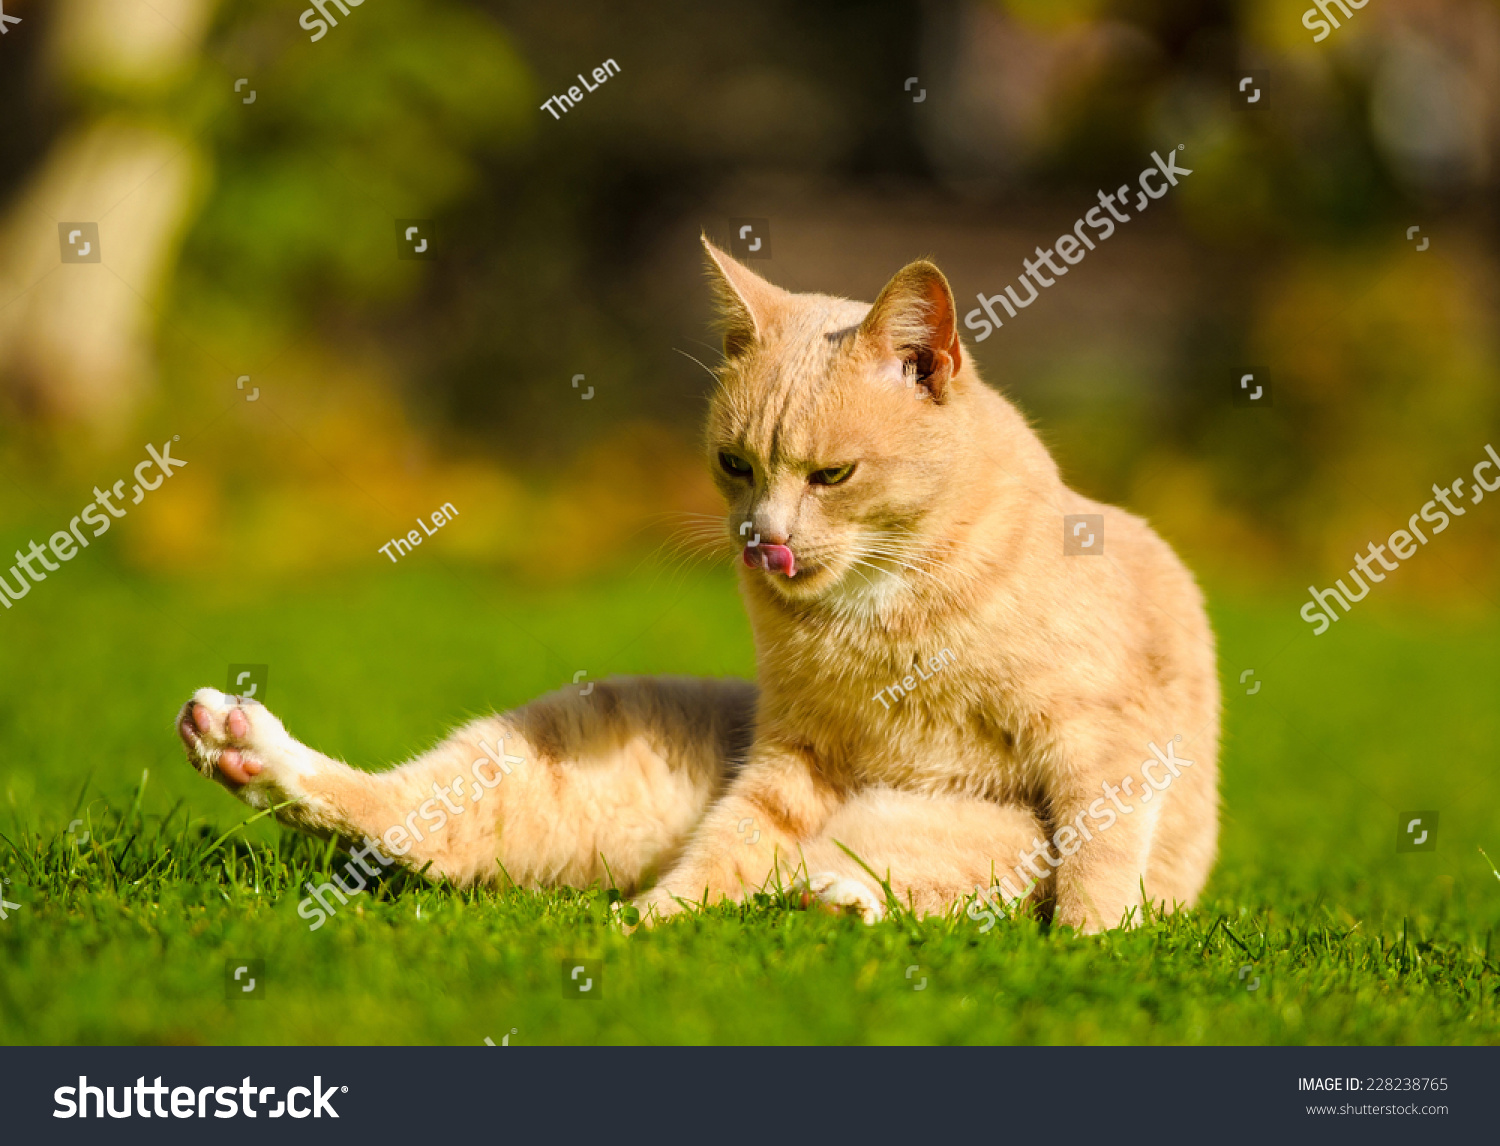 Funny Redhaired Cat Stock Photo 228238765 - Shutterstock